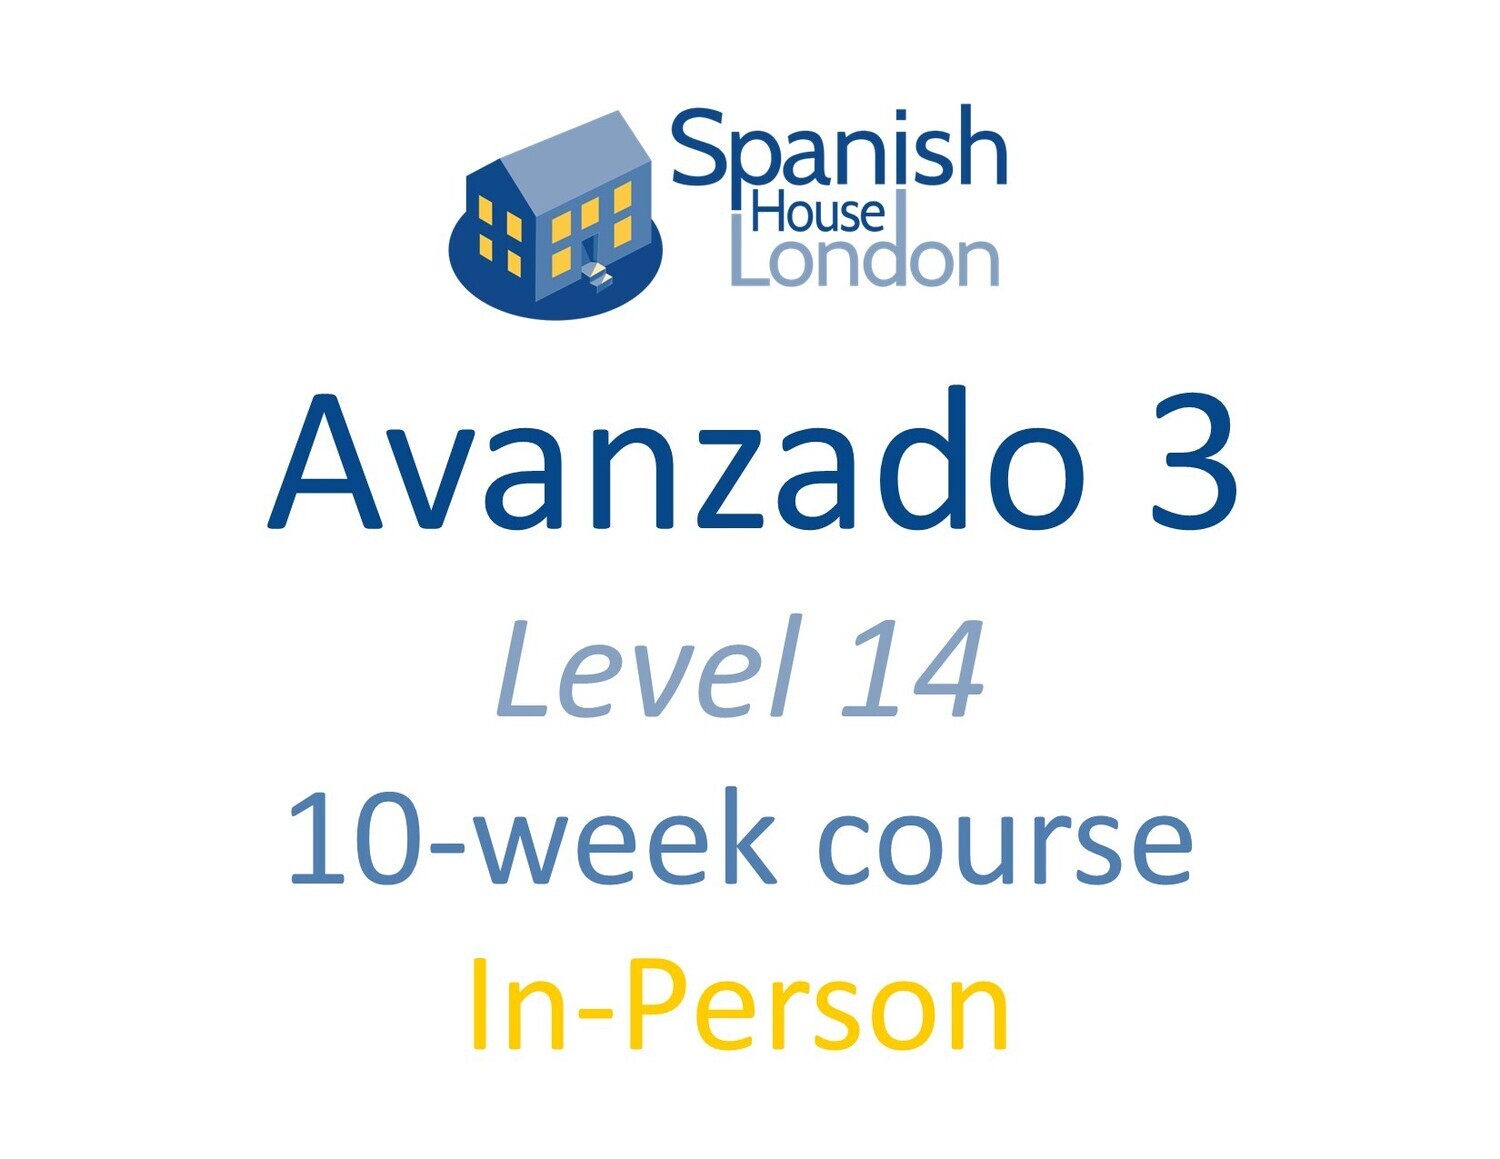 Avanzado 3 Course starting on 2nd April at 6pm in Clapham